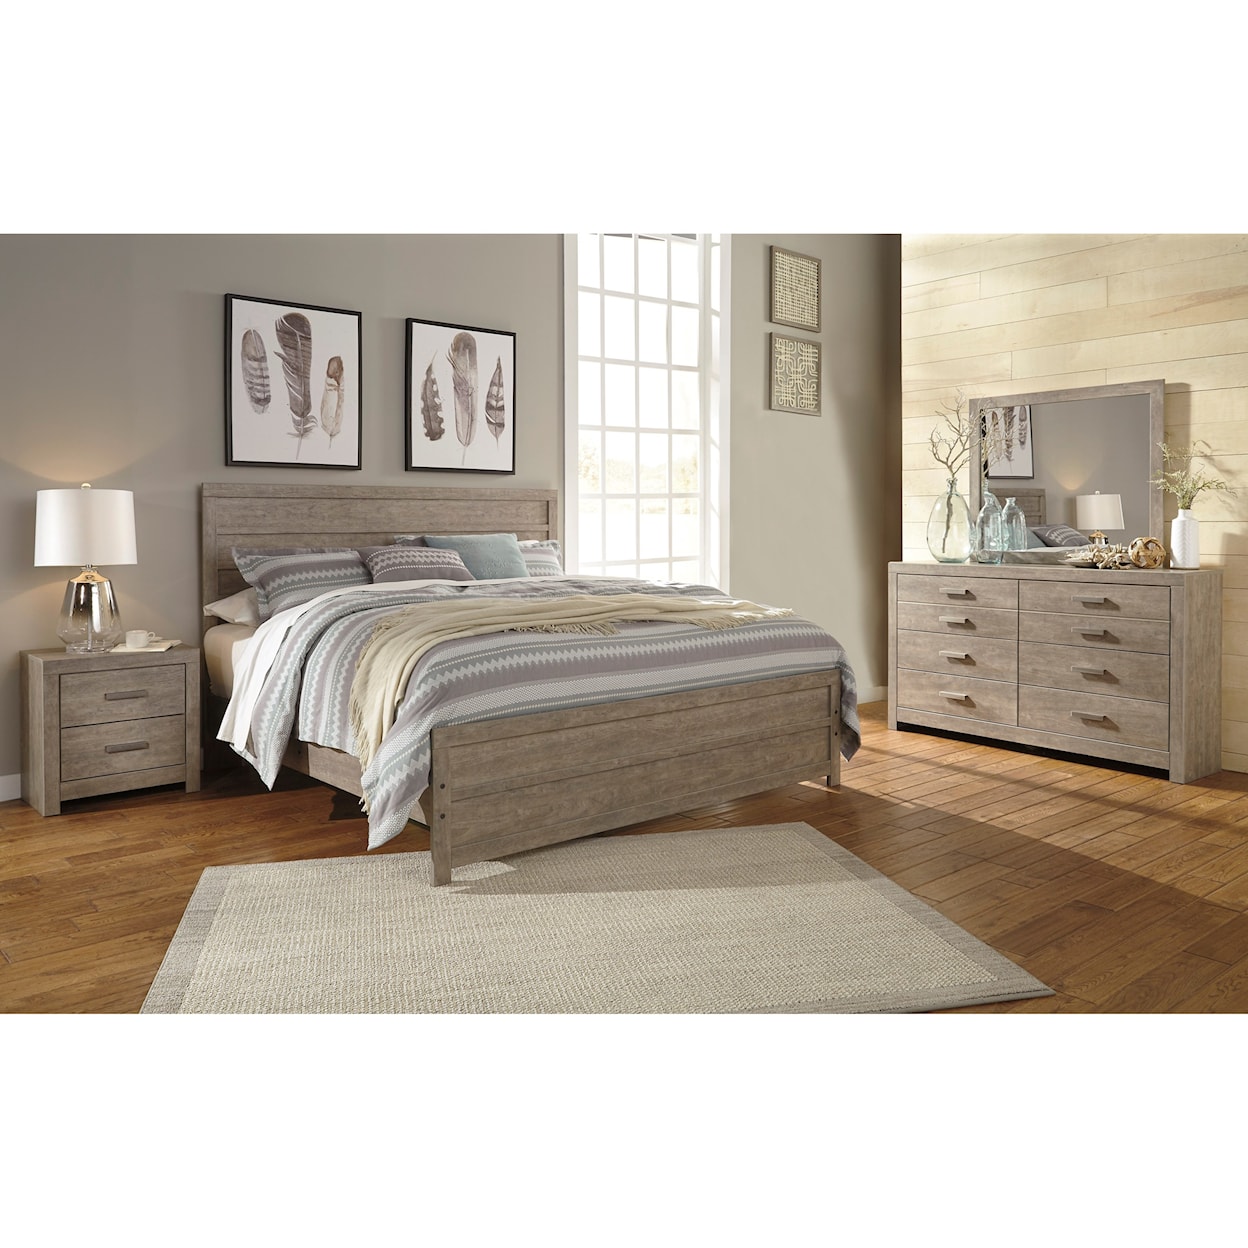 Signature Design by Ashley Furniture Culverbach King Bedroom Group